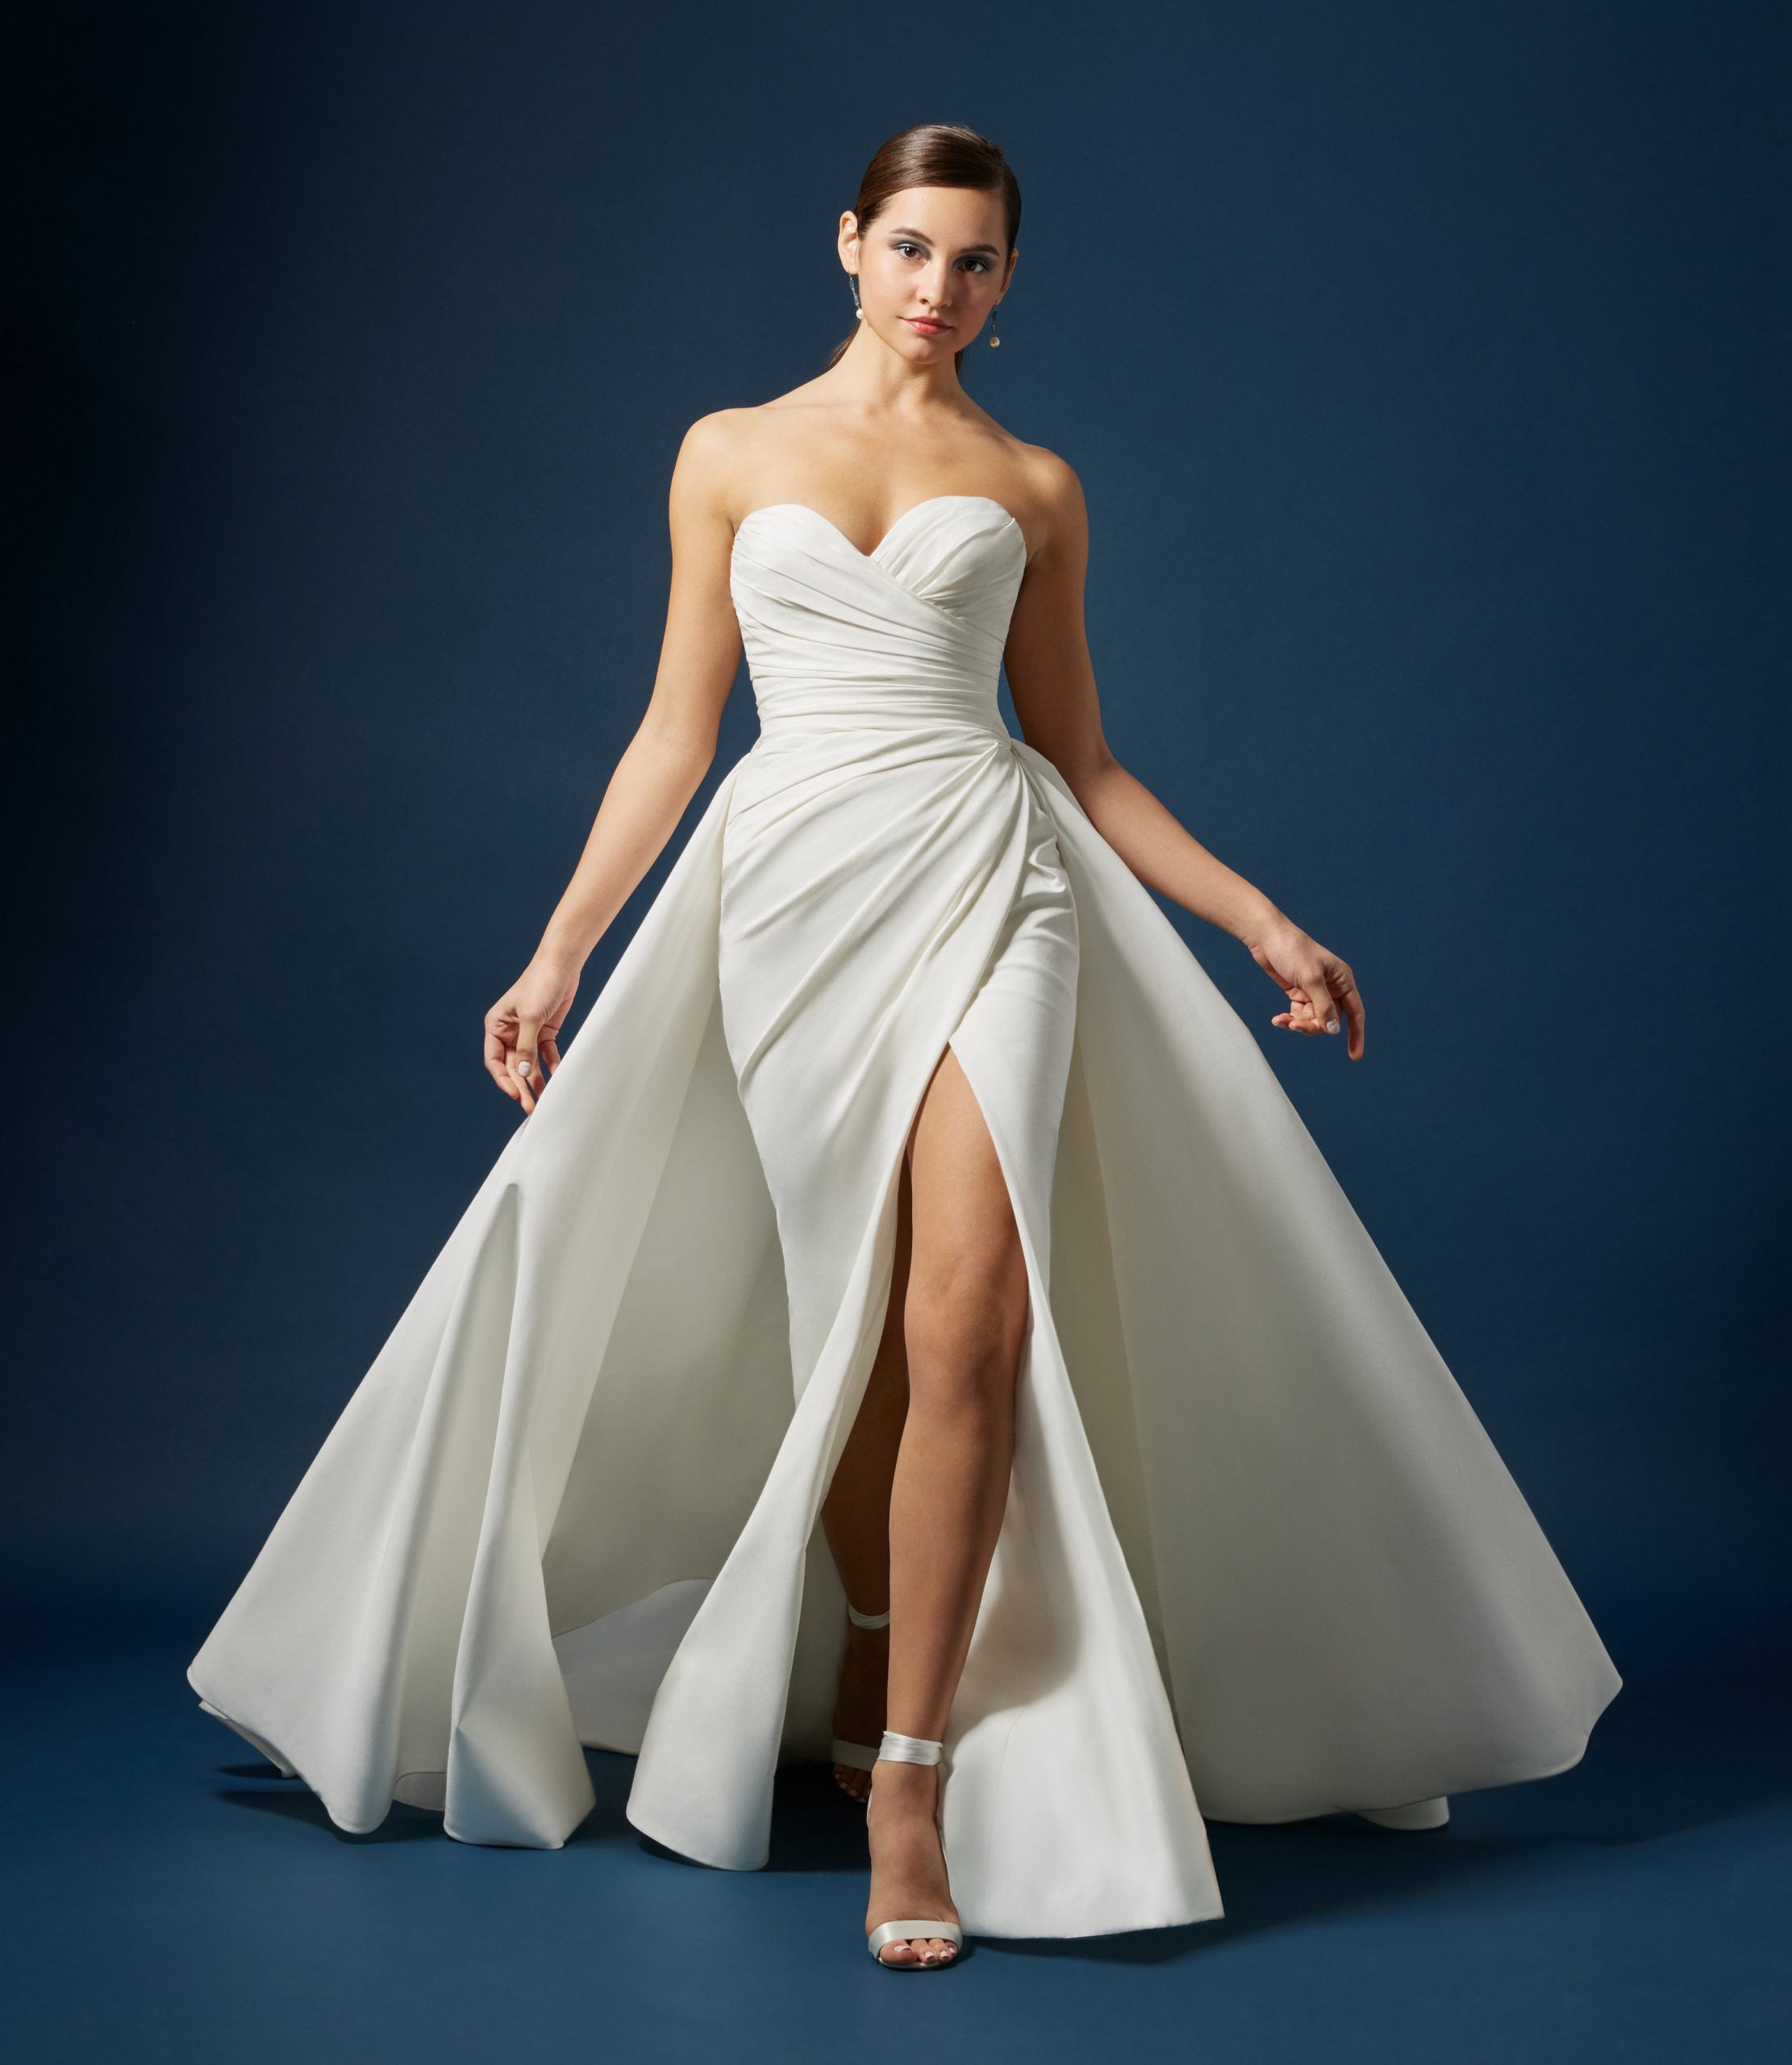 Strapless Fit And Flare Wedding Dress With Detachable Overskirt by Lazaro - Image 1